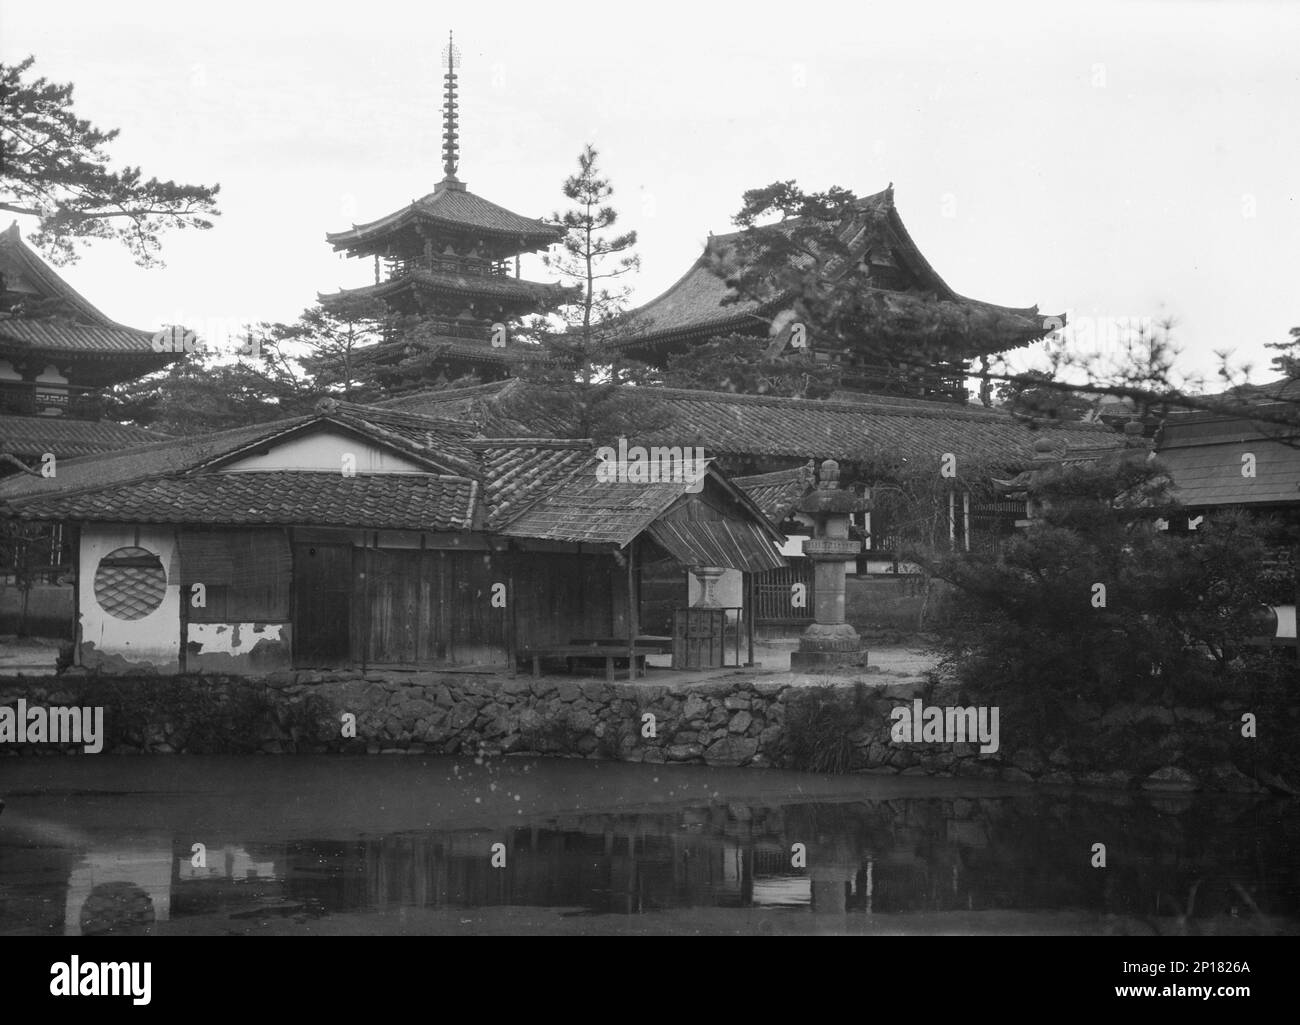 Travel views of Japan and Korea, 1908. Photo shows Horyuji, a temple in Ikaruga, Japan. The pagoda, constructed in the 7th century, is considered one of the oldest wooden buildings in the world. Stock Photo